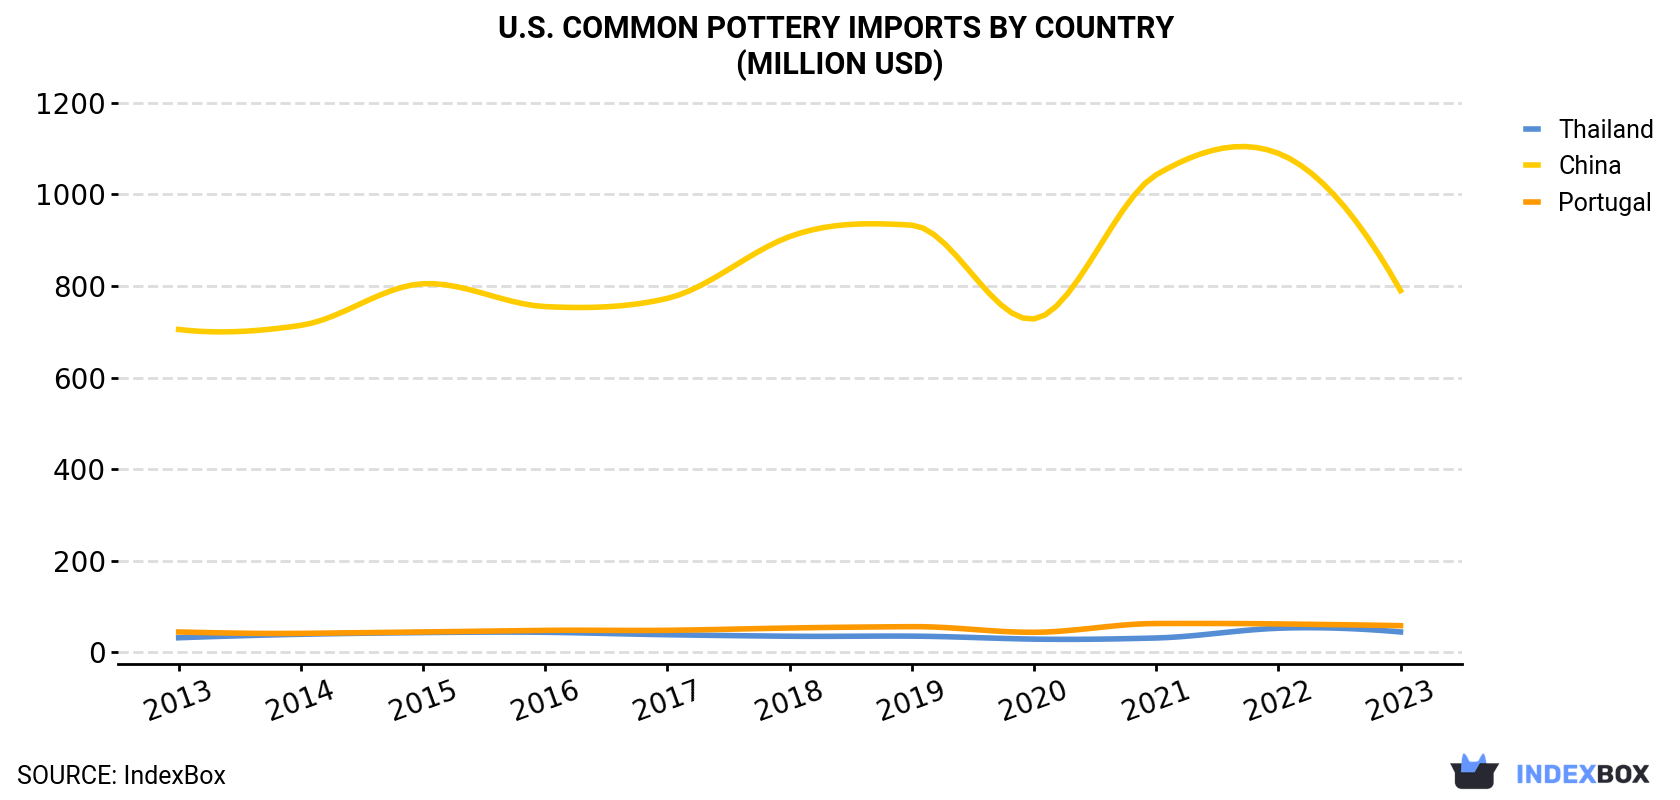 U.S. Common Pottery Imports By Country (Million USD)